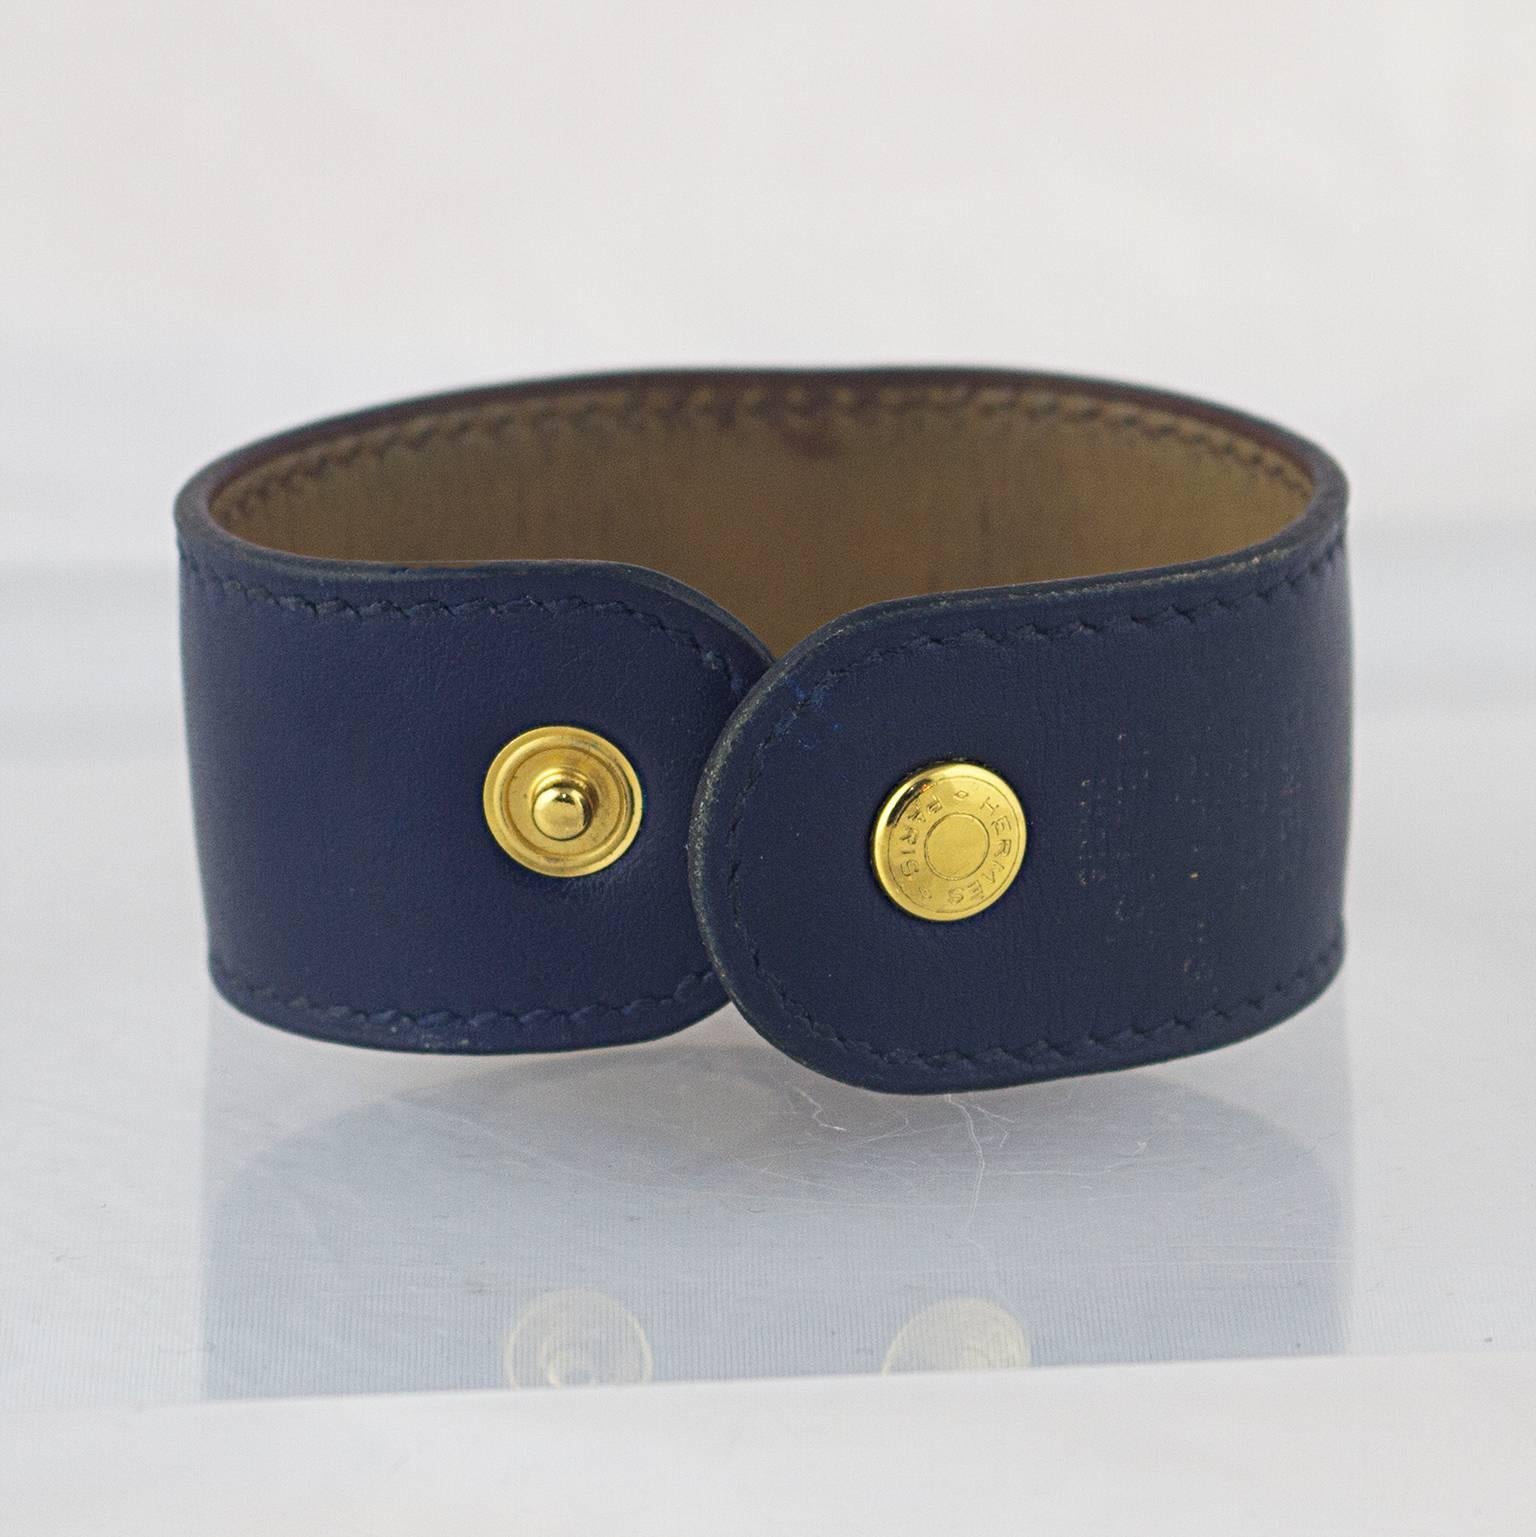 A navy leather box calf leather Hermes Medor bracelet.
A famous and sought after Hermes piece, great to stack with other bracelets and watches. 
Made in September 1993.
In a fair vintage condition. Some rubbing to the leather consistent with age and